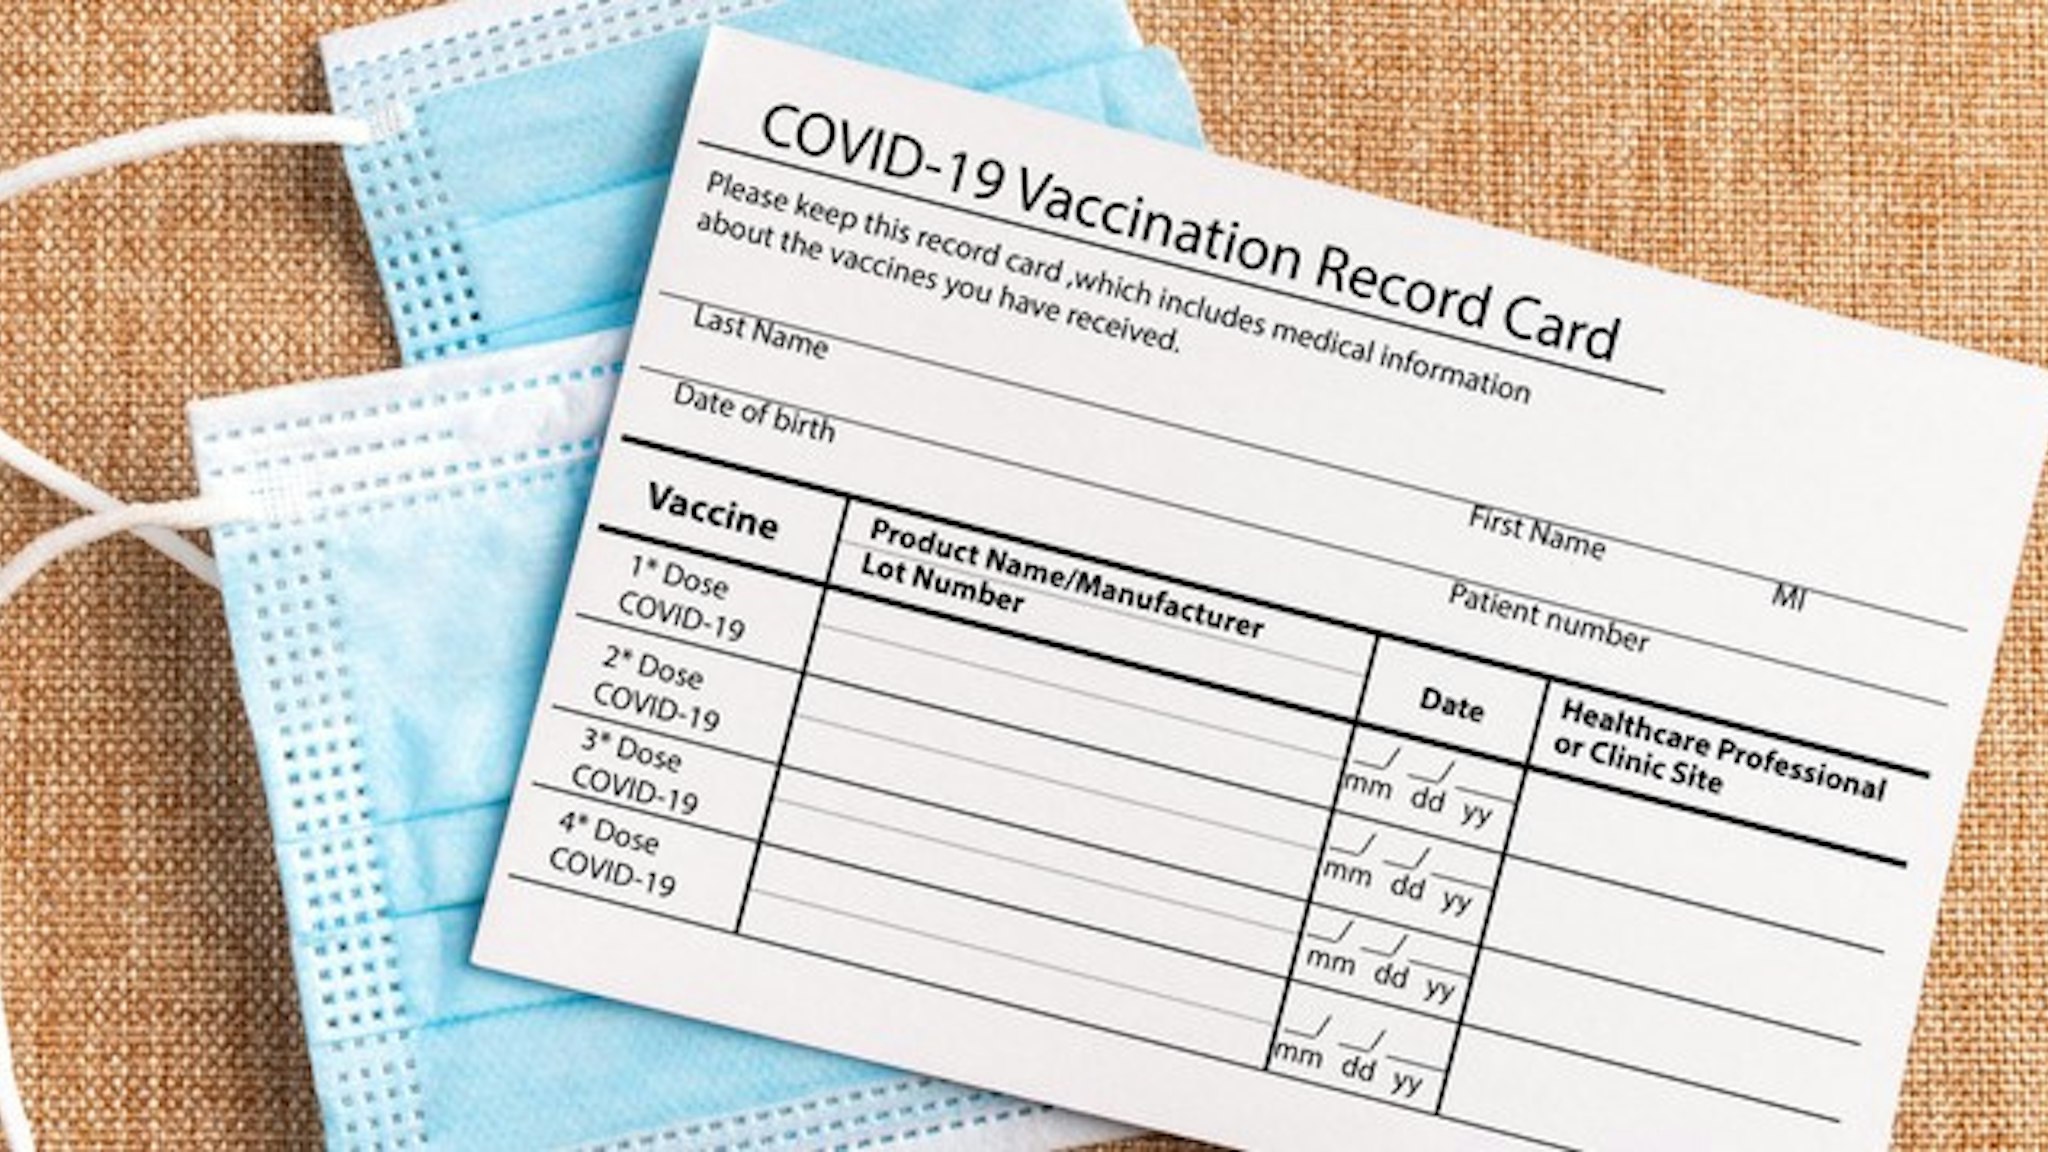 Coronavirus vaccination record card. Protective mask divided into two parts. Concept of defeating Covid-19